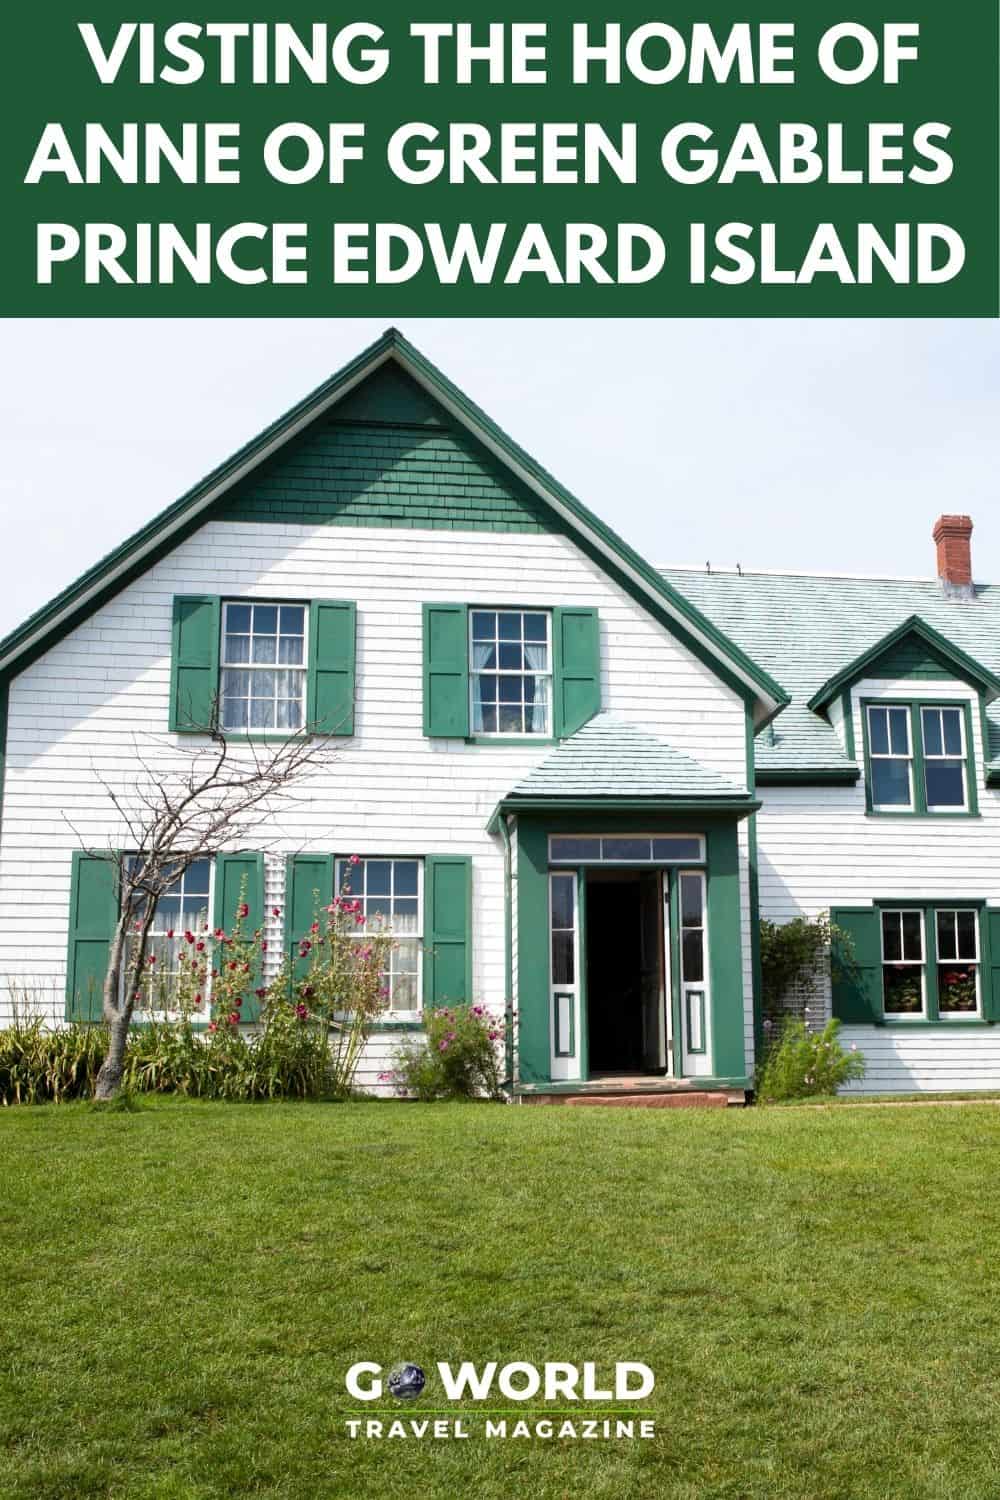 Avonlea, fictional home of Anne of Green Gables in PEI, is based on the town of Cavendish where you can visit her iconic house and more. #PEI #anneofgreengables